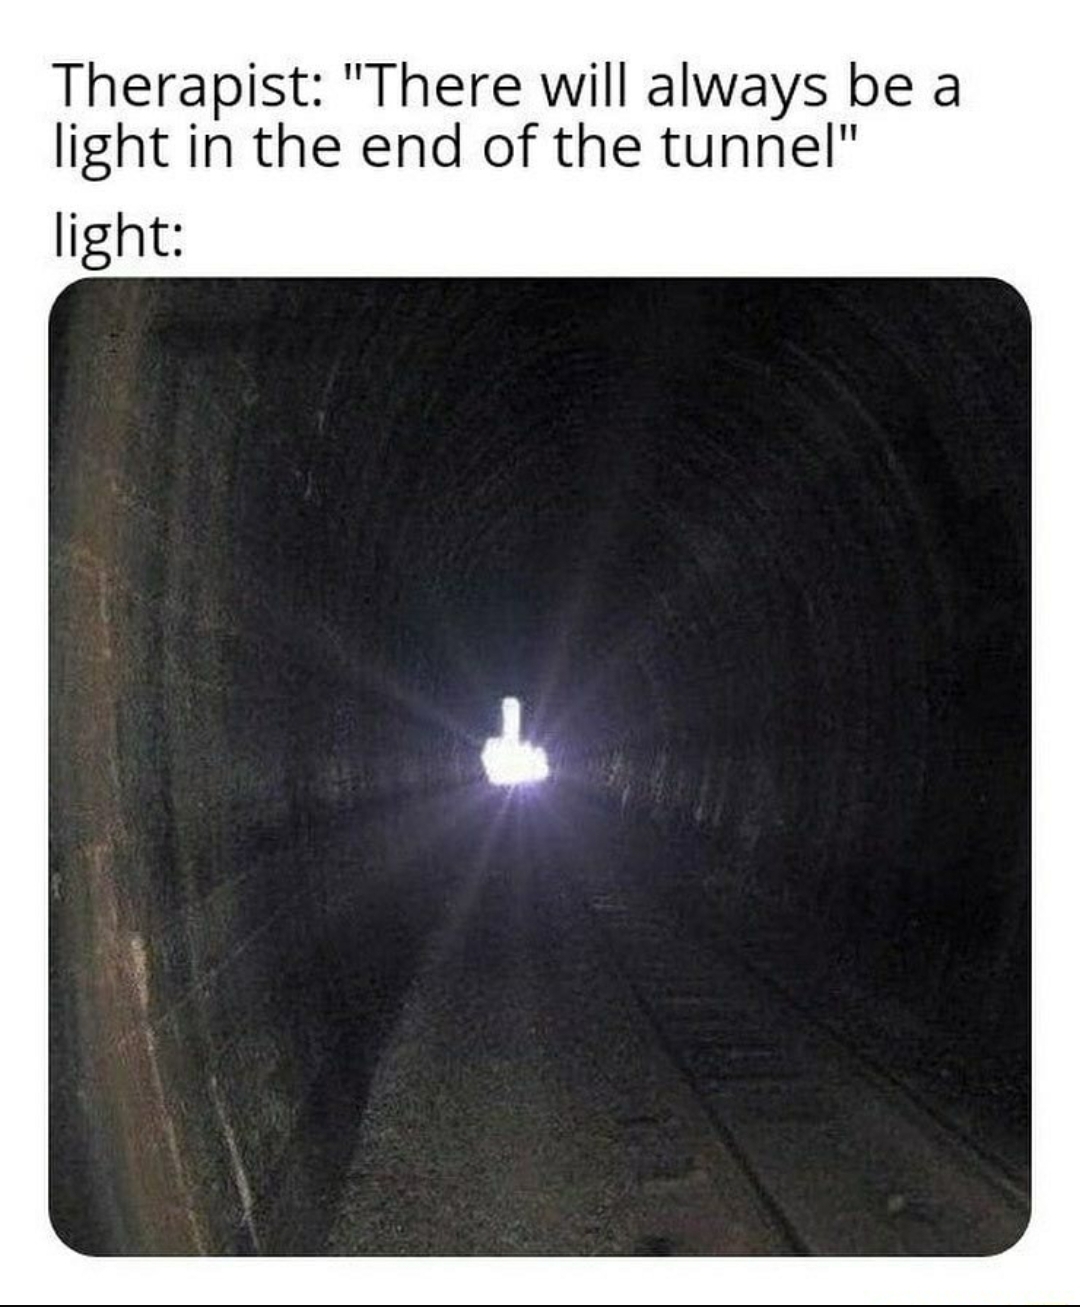 angle - Therapist "There will always be a light in the end of the tunnel" light